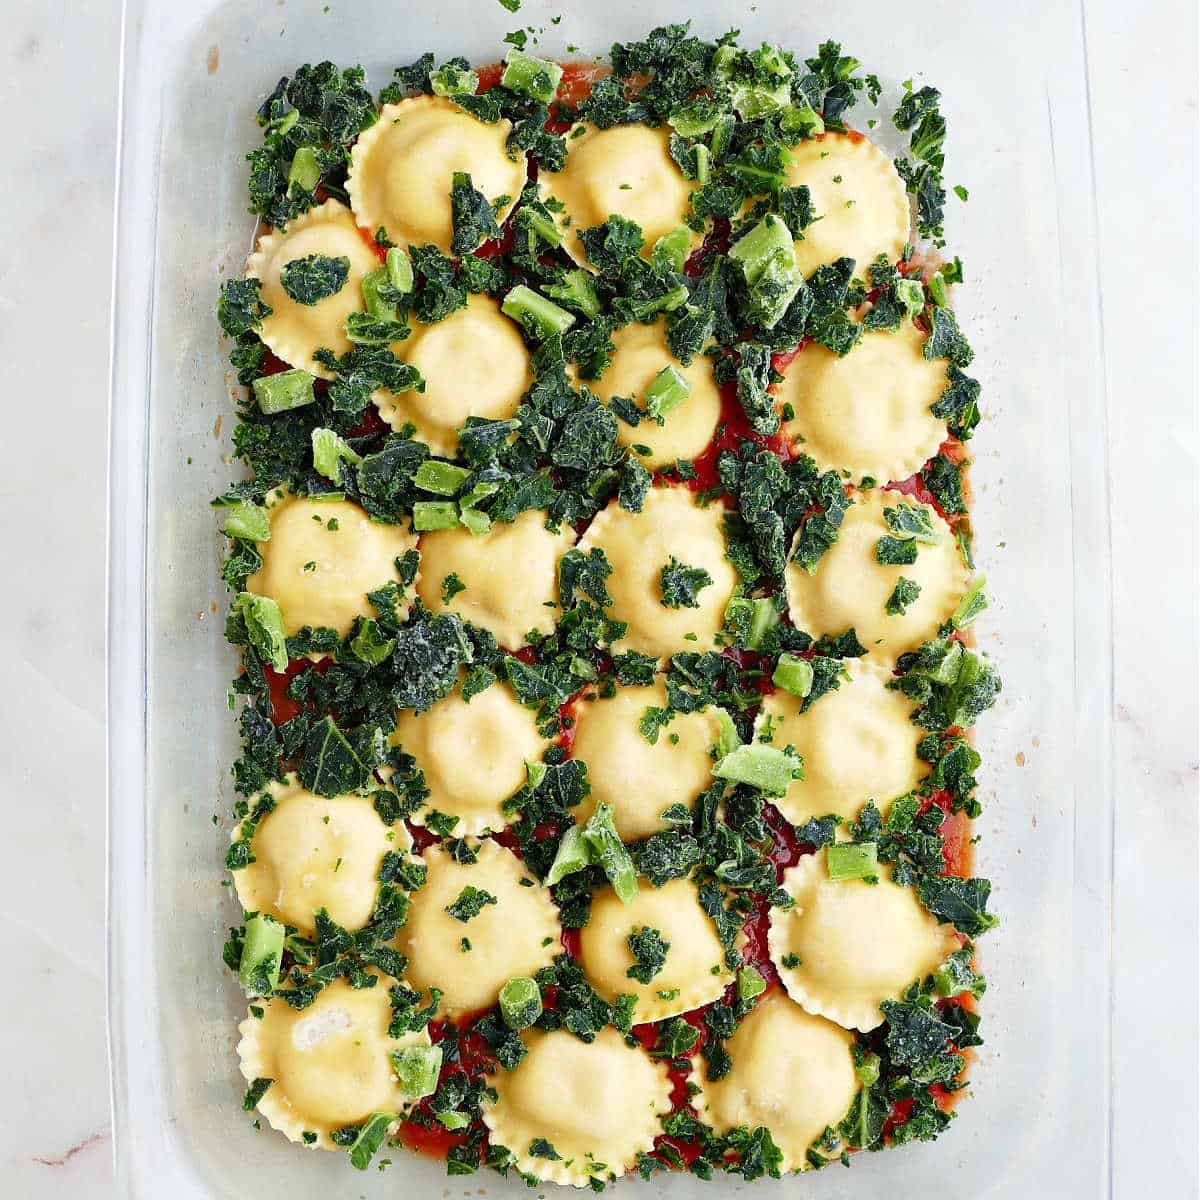 ravioli, marinara sauce, and chopped frozen kale spread out in a baking dish